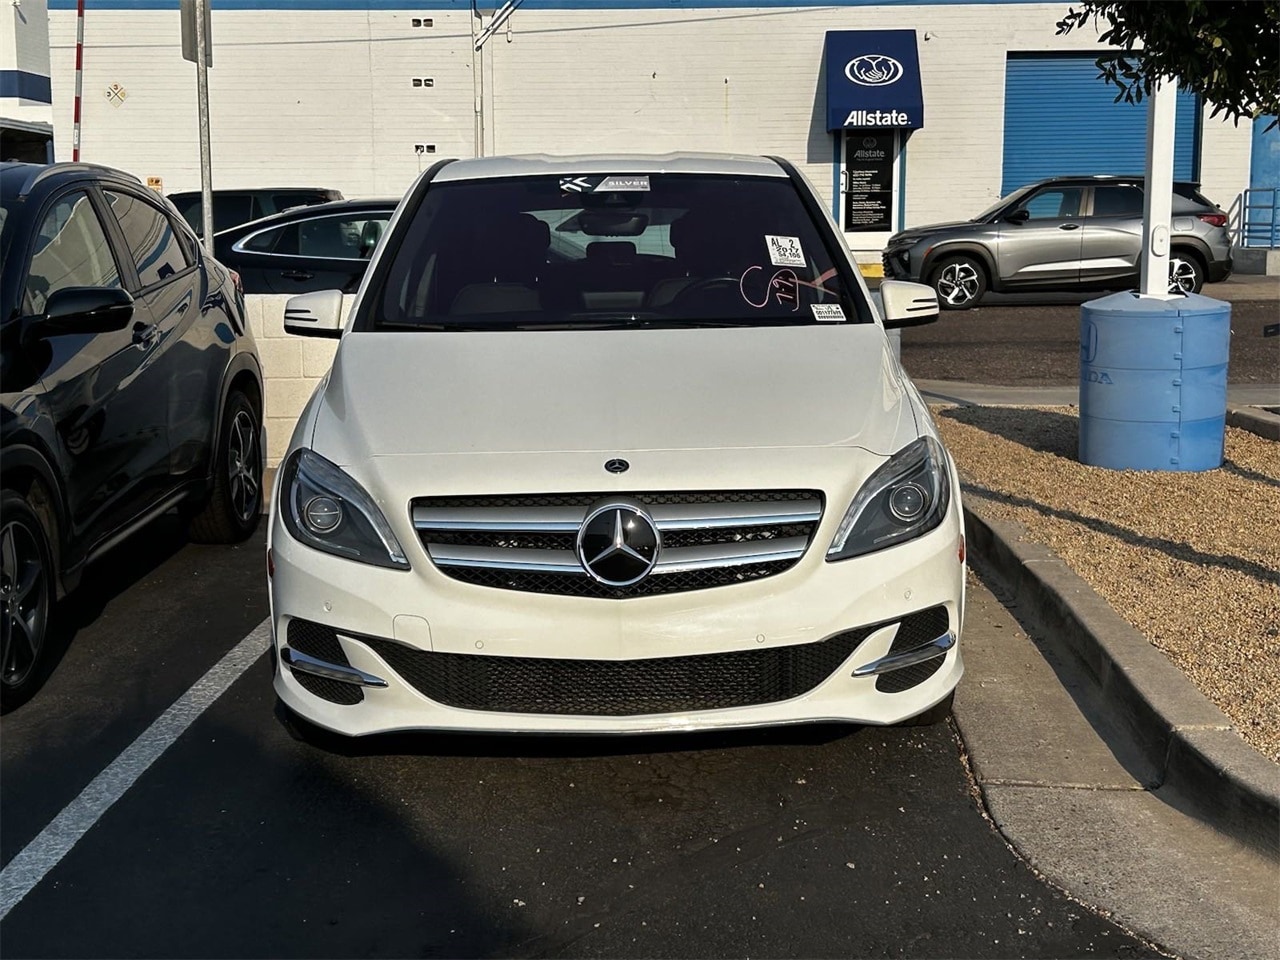 Used 2017 Mercedes-Benz B-Class B250e with VIN WDDVP9ABXHJ015834 for sale in Phoenix, AZ